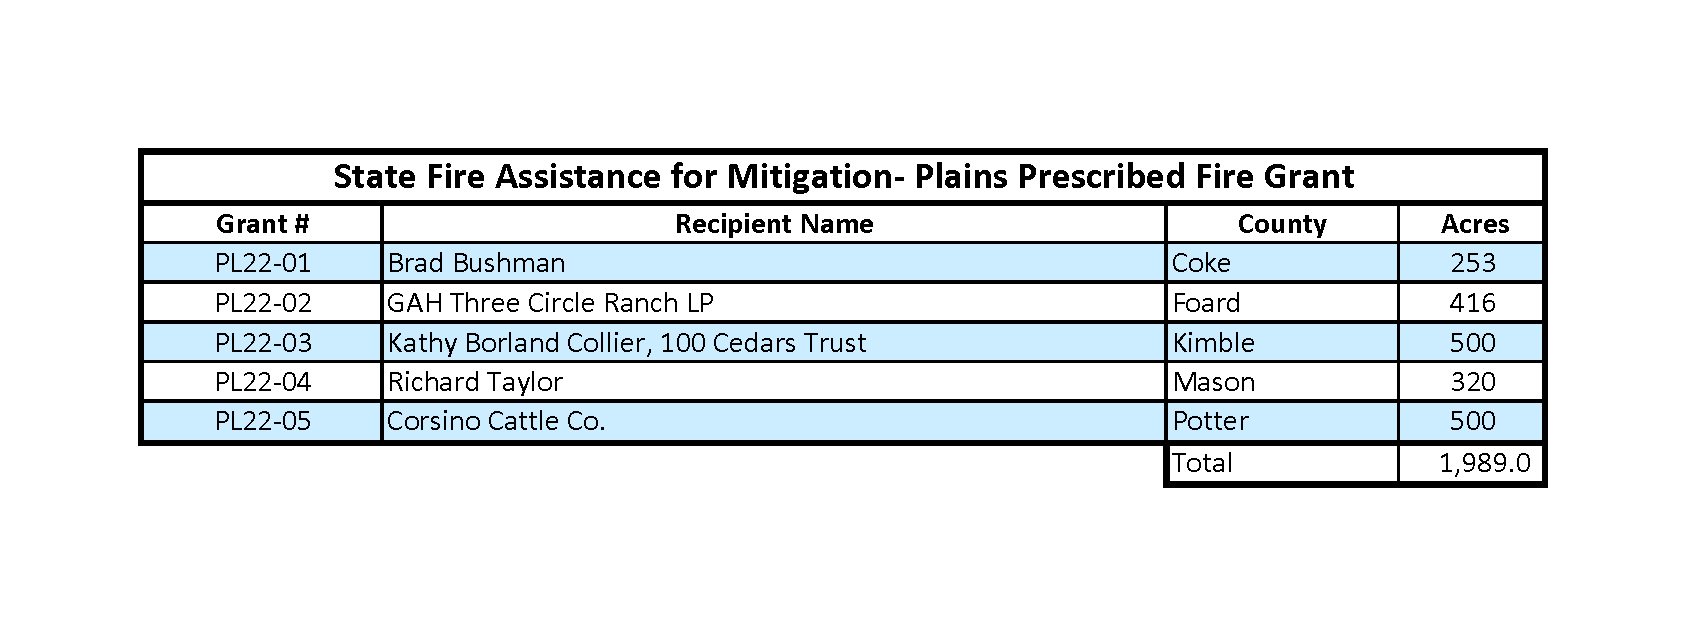 2022 TAMFS Rx Grants Public Listing Page 3 Resized